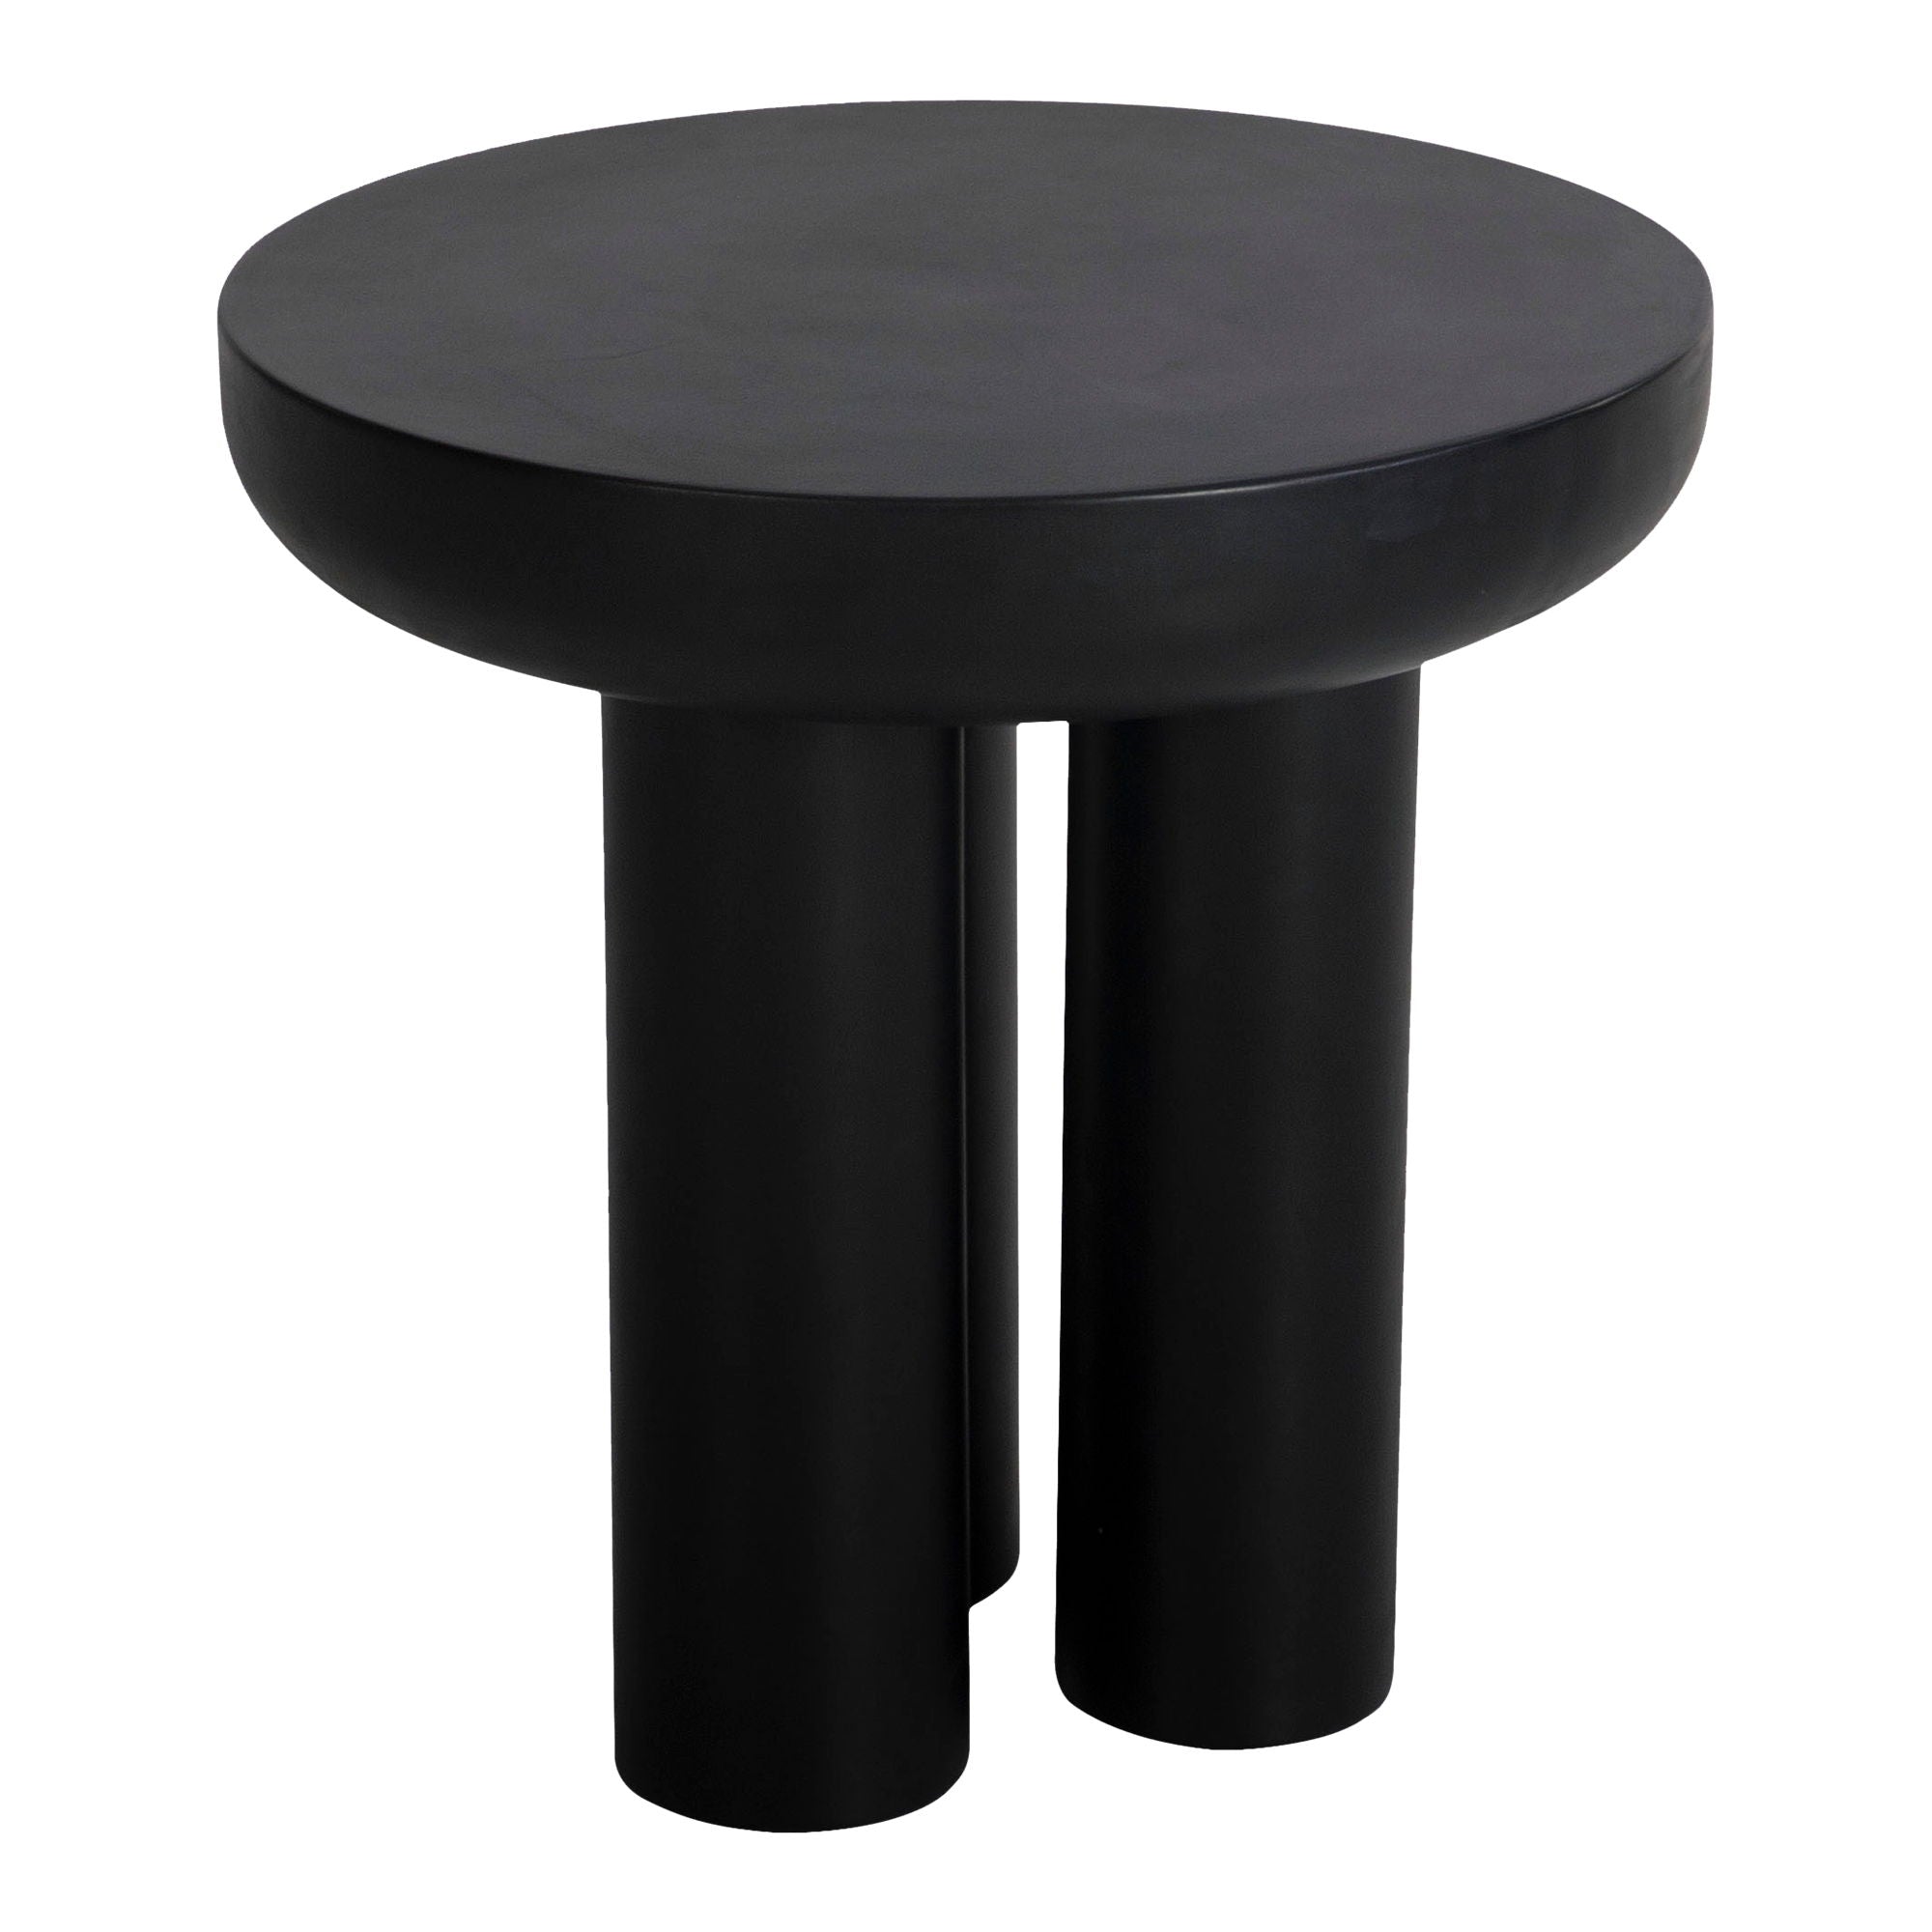 Rocca - Side Table - Black - Cement